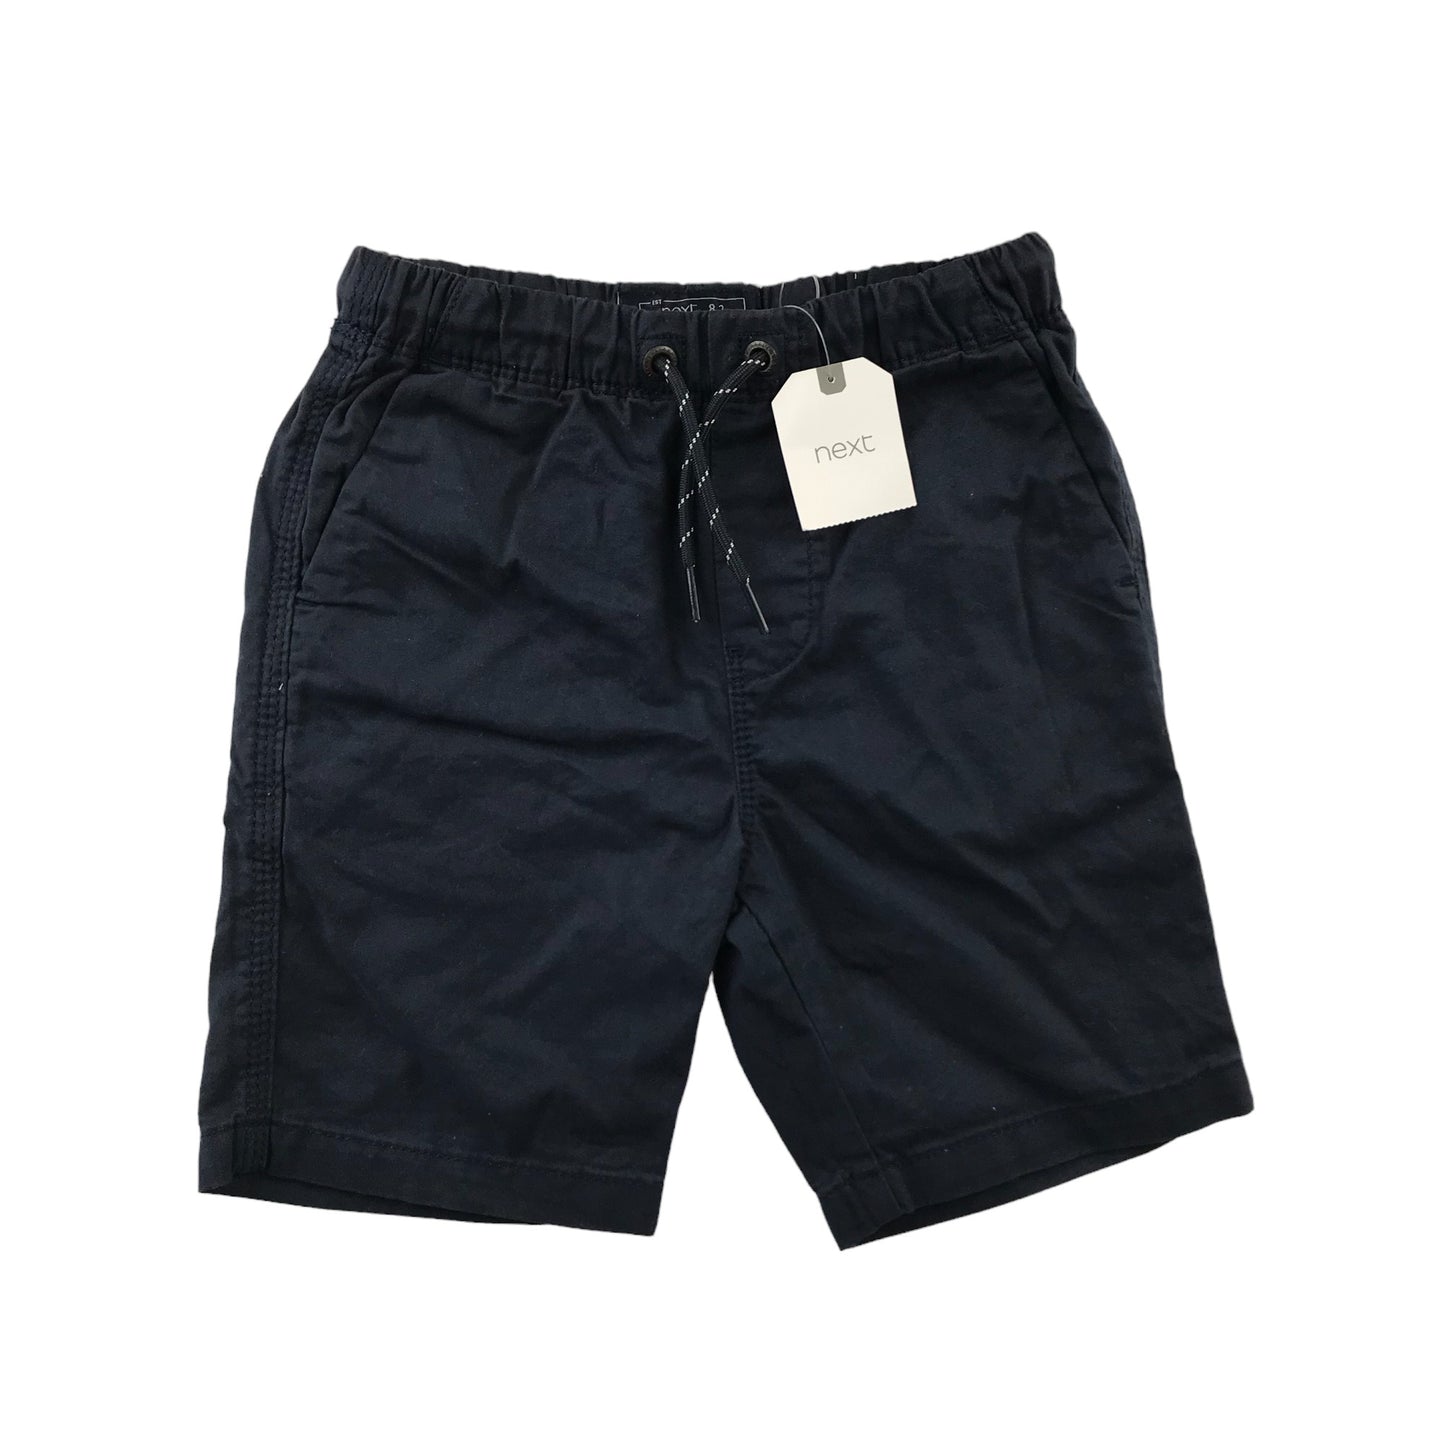 Next Shorts Bundle Age 5 Navy and Light Beige Plain Pull Up Chino Style Cotton